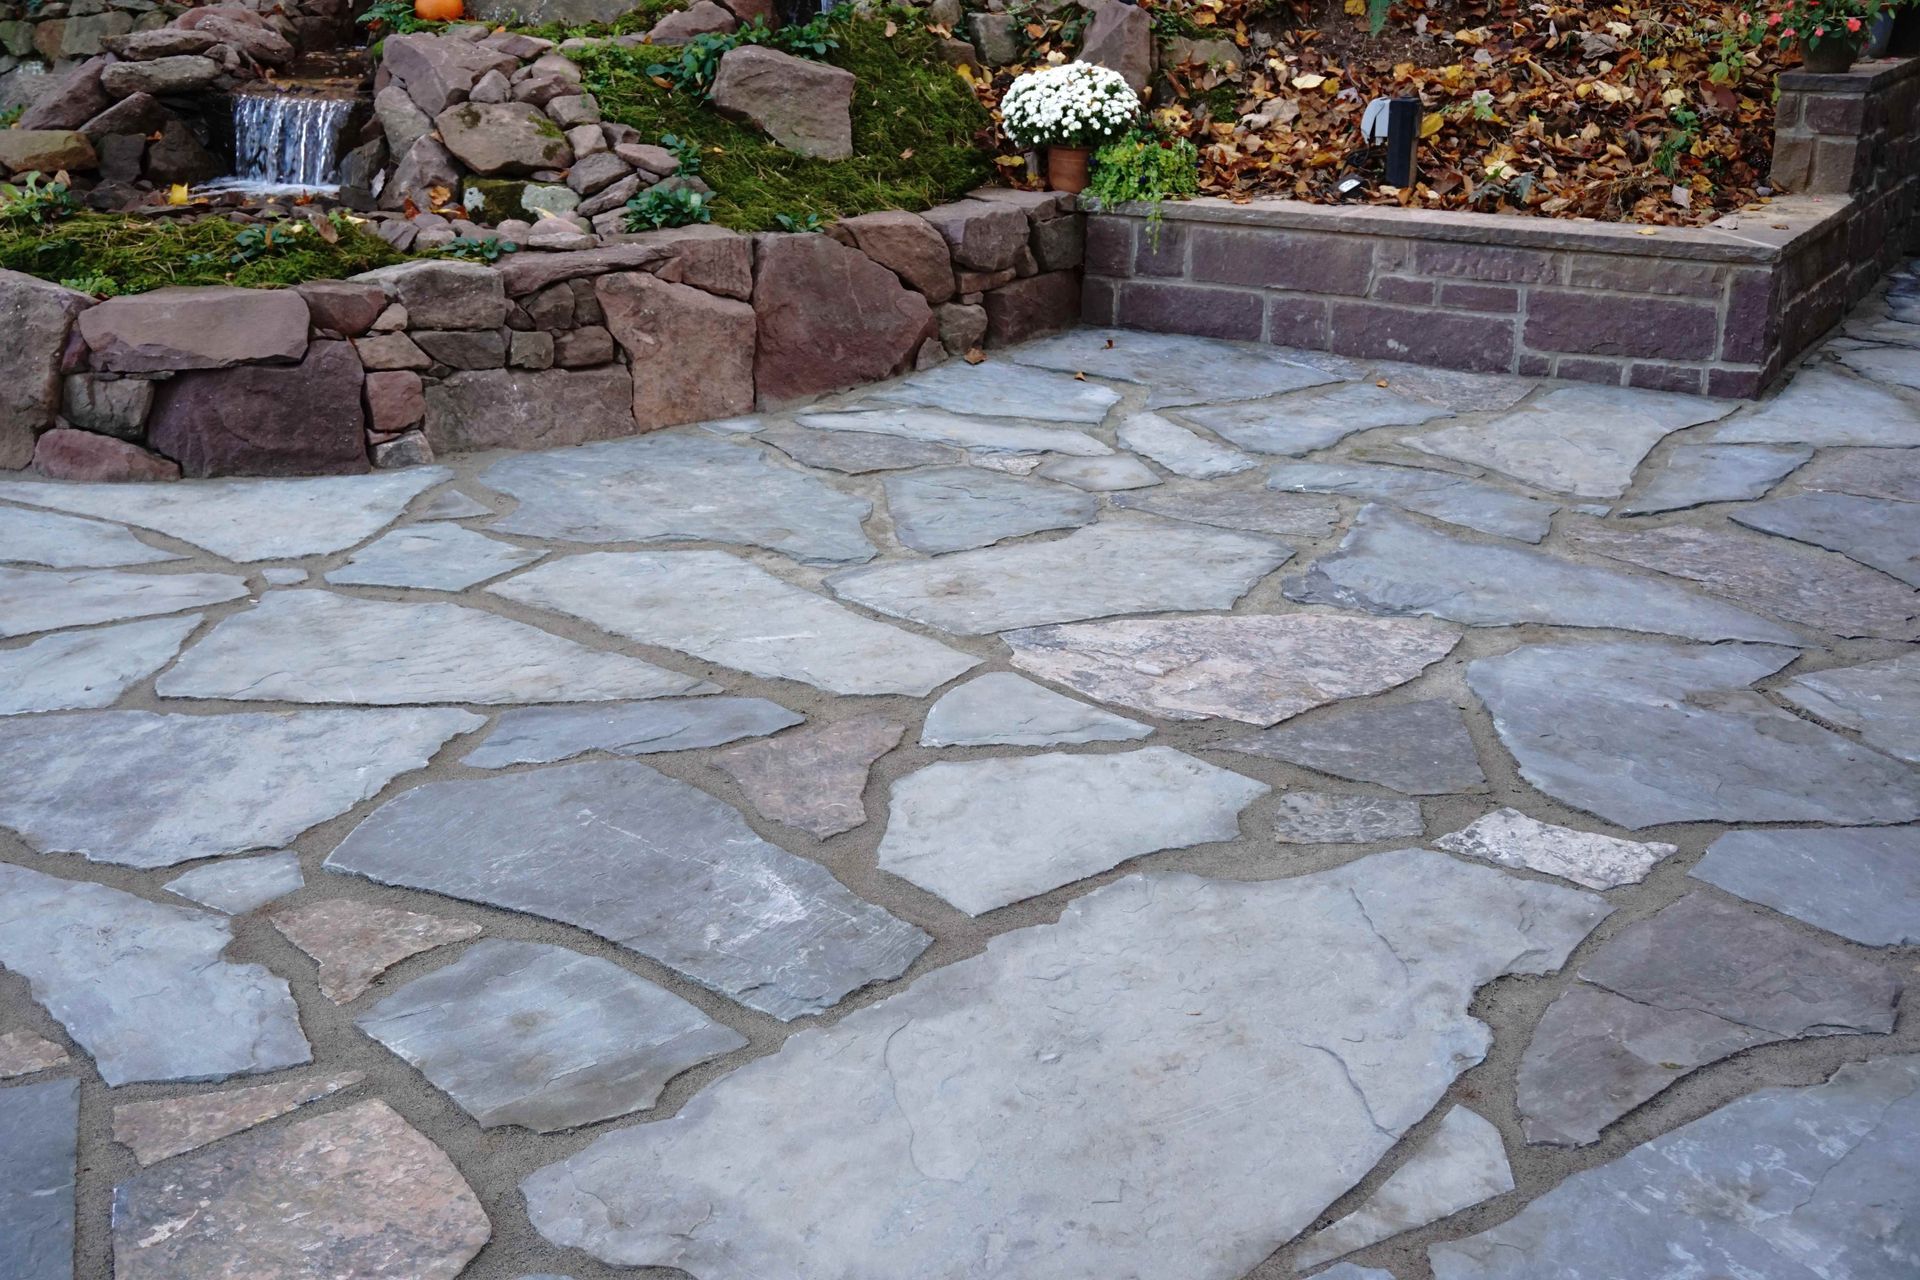 We have a huge selection of Natural Flagstone Slabs for Patio for sale in Lebanon PA. We Deliver Natural Stone to Lebanon, Annville, Palmyra, & Cornwall.